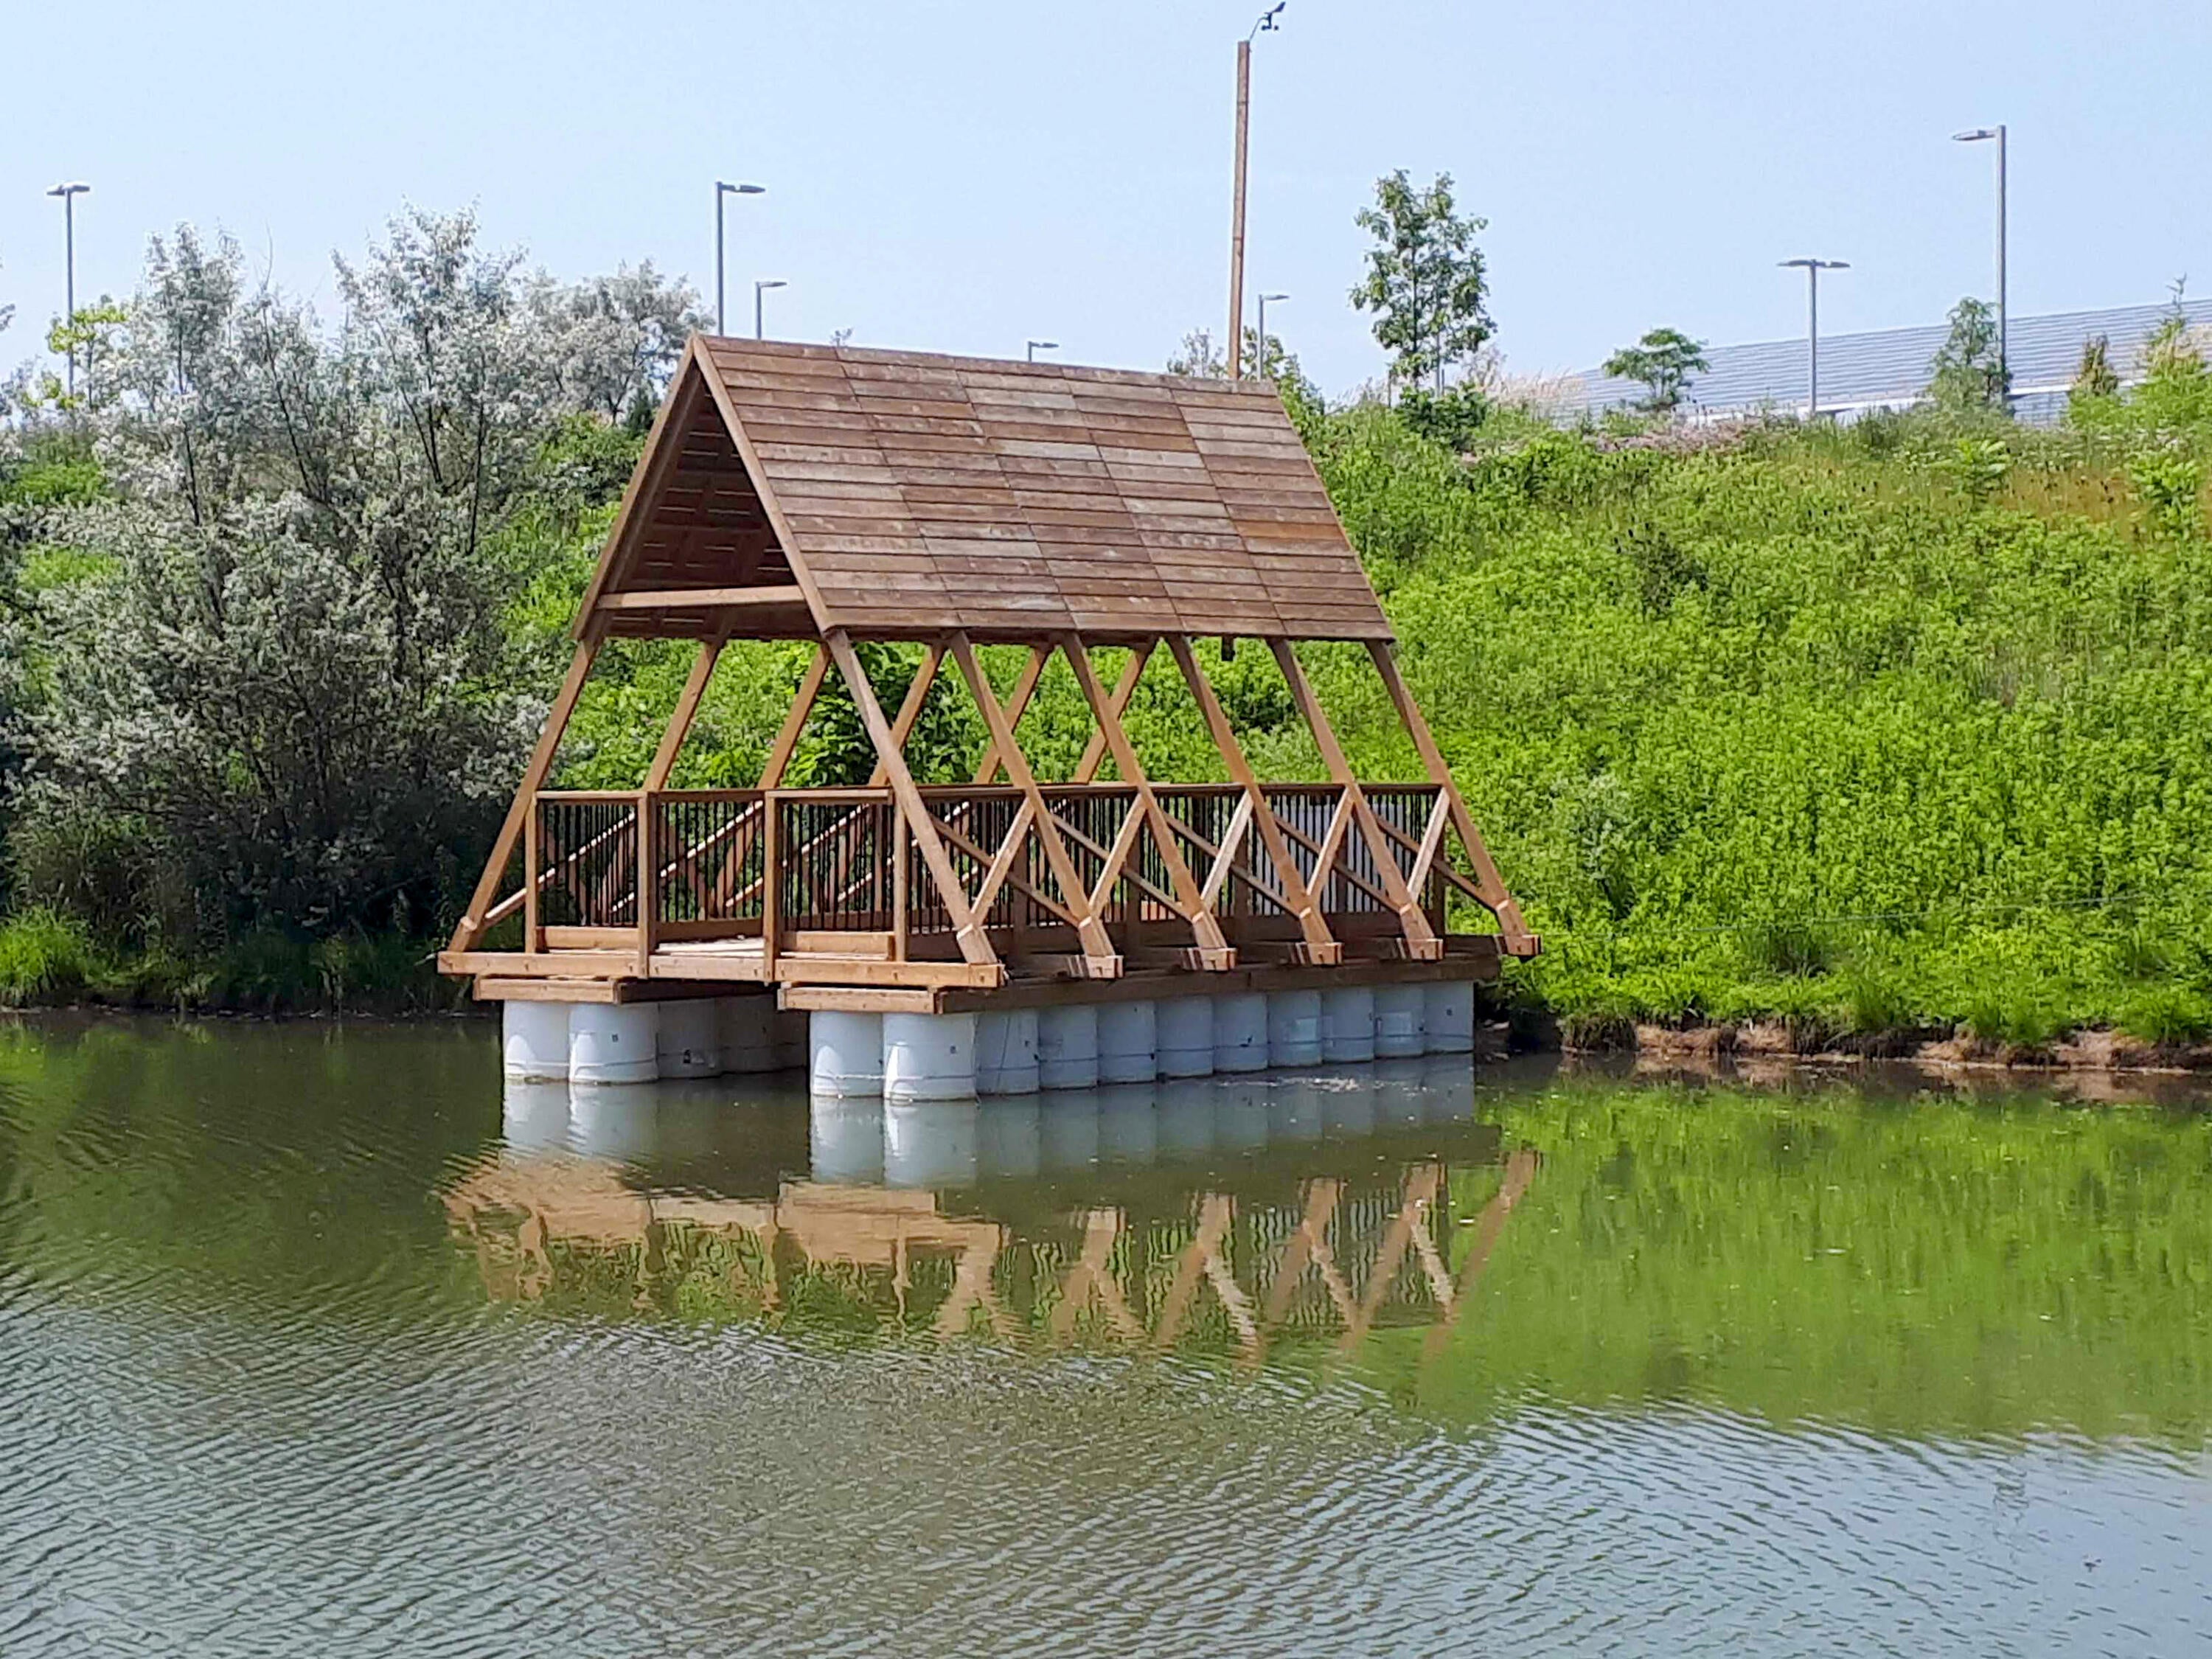 Experimental prototype of an amphibious pavilion located at the University of Waterloo’s North Campus